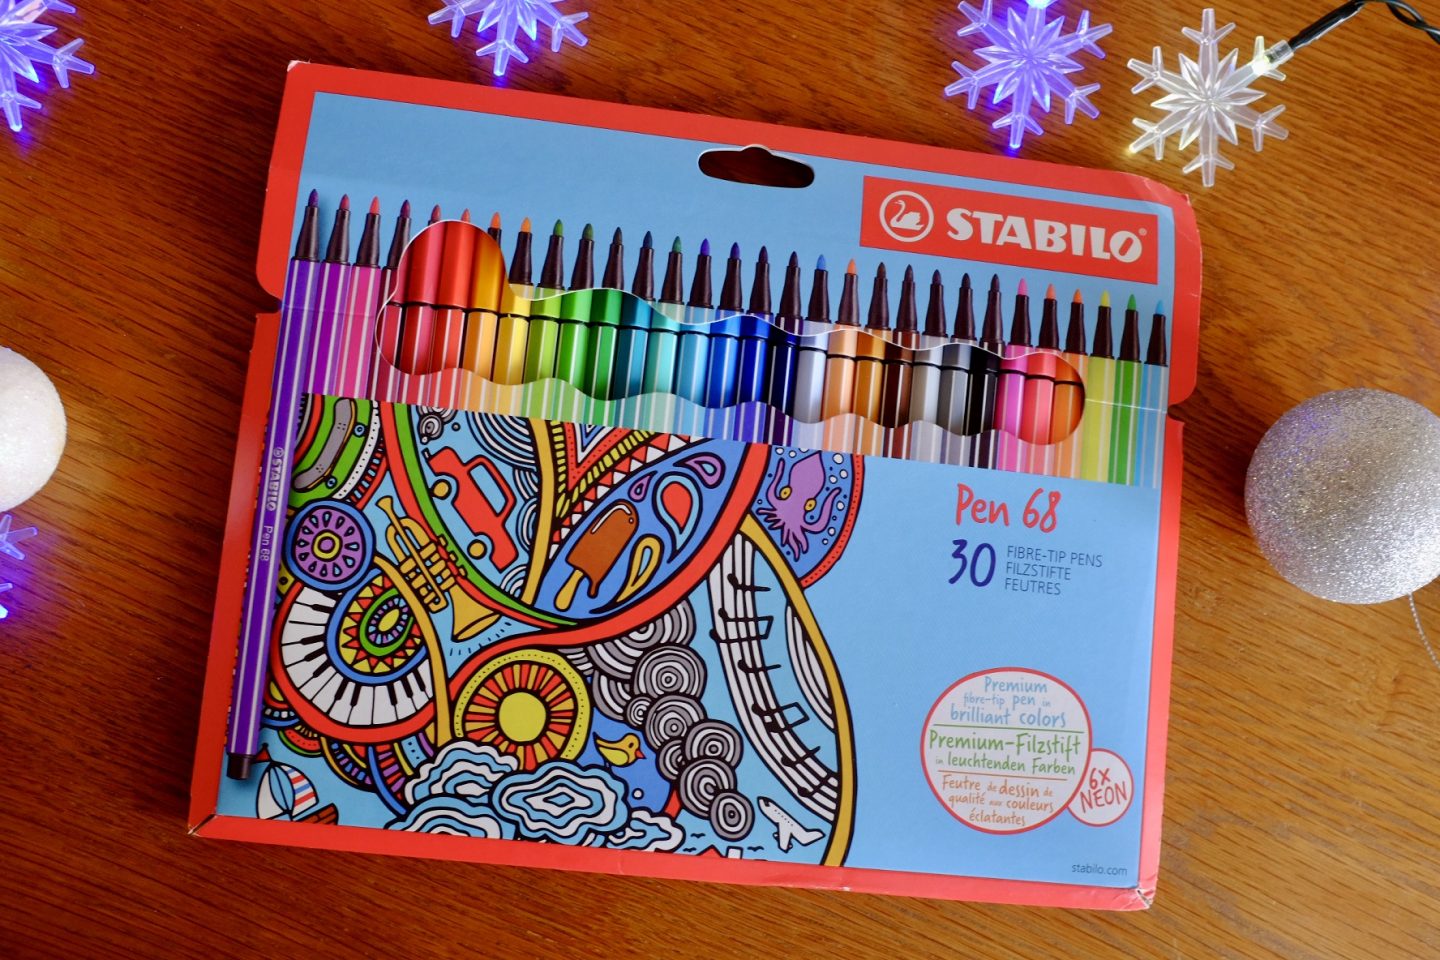 30 fibre tipped pens from Stabilo